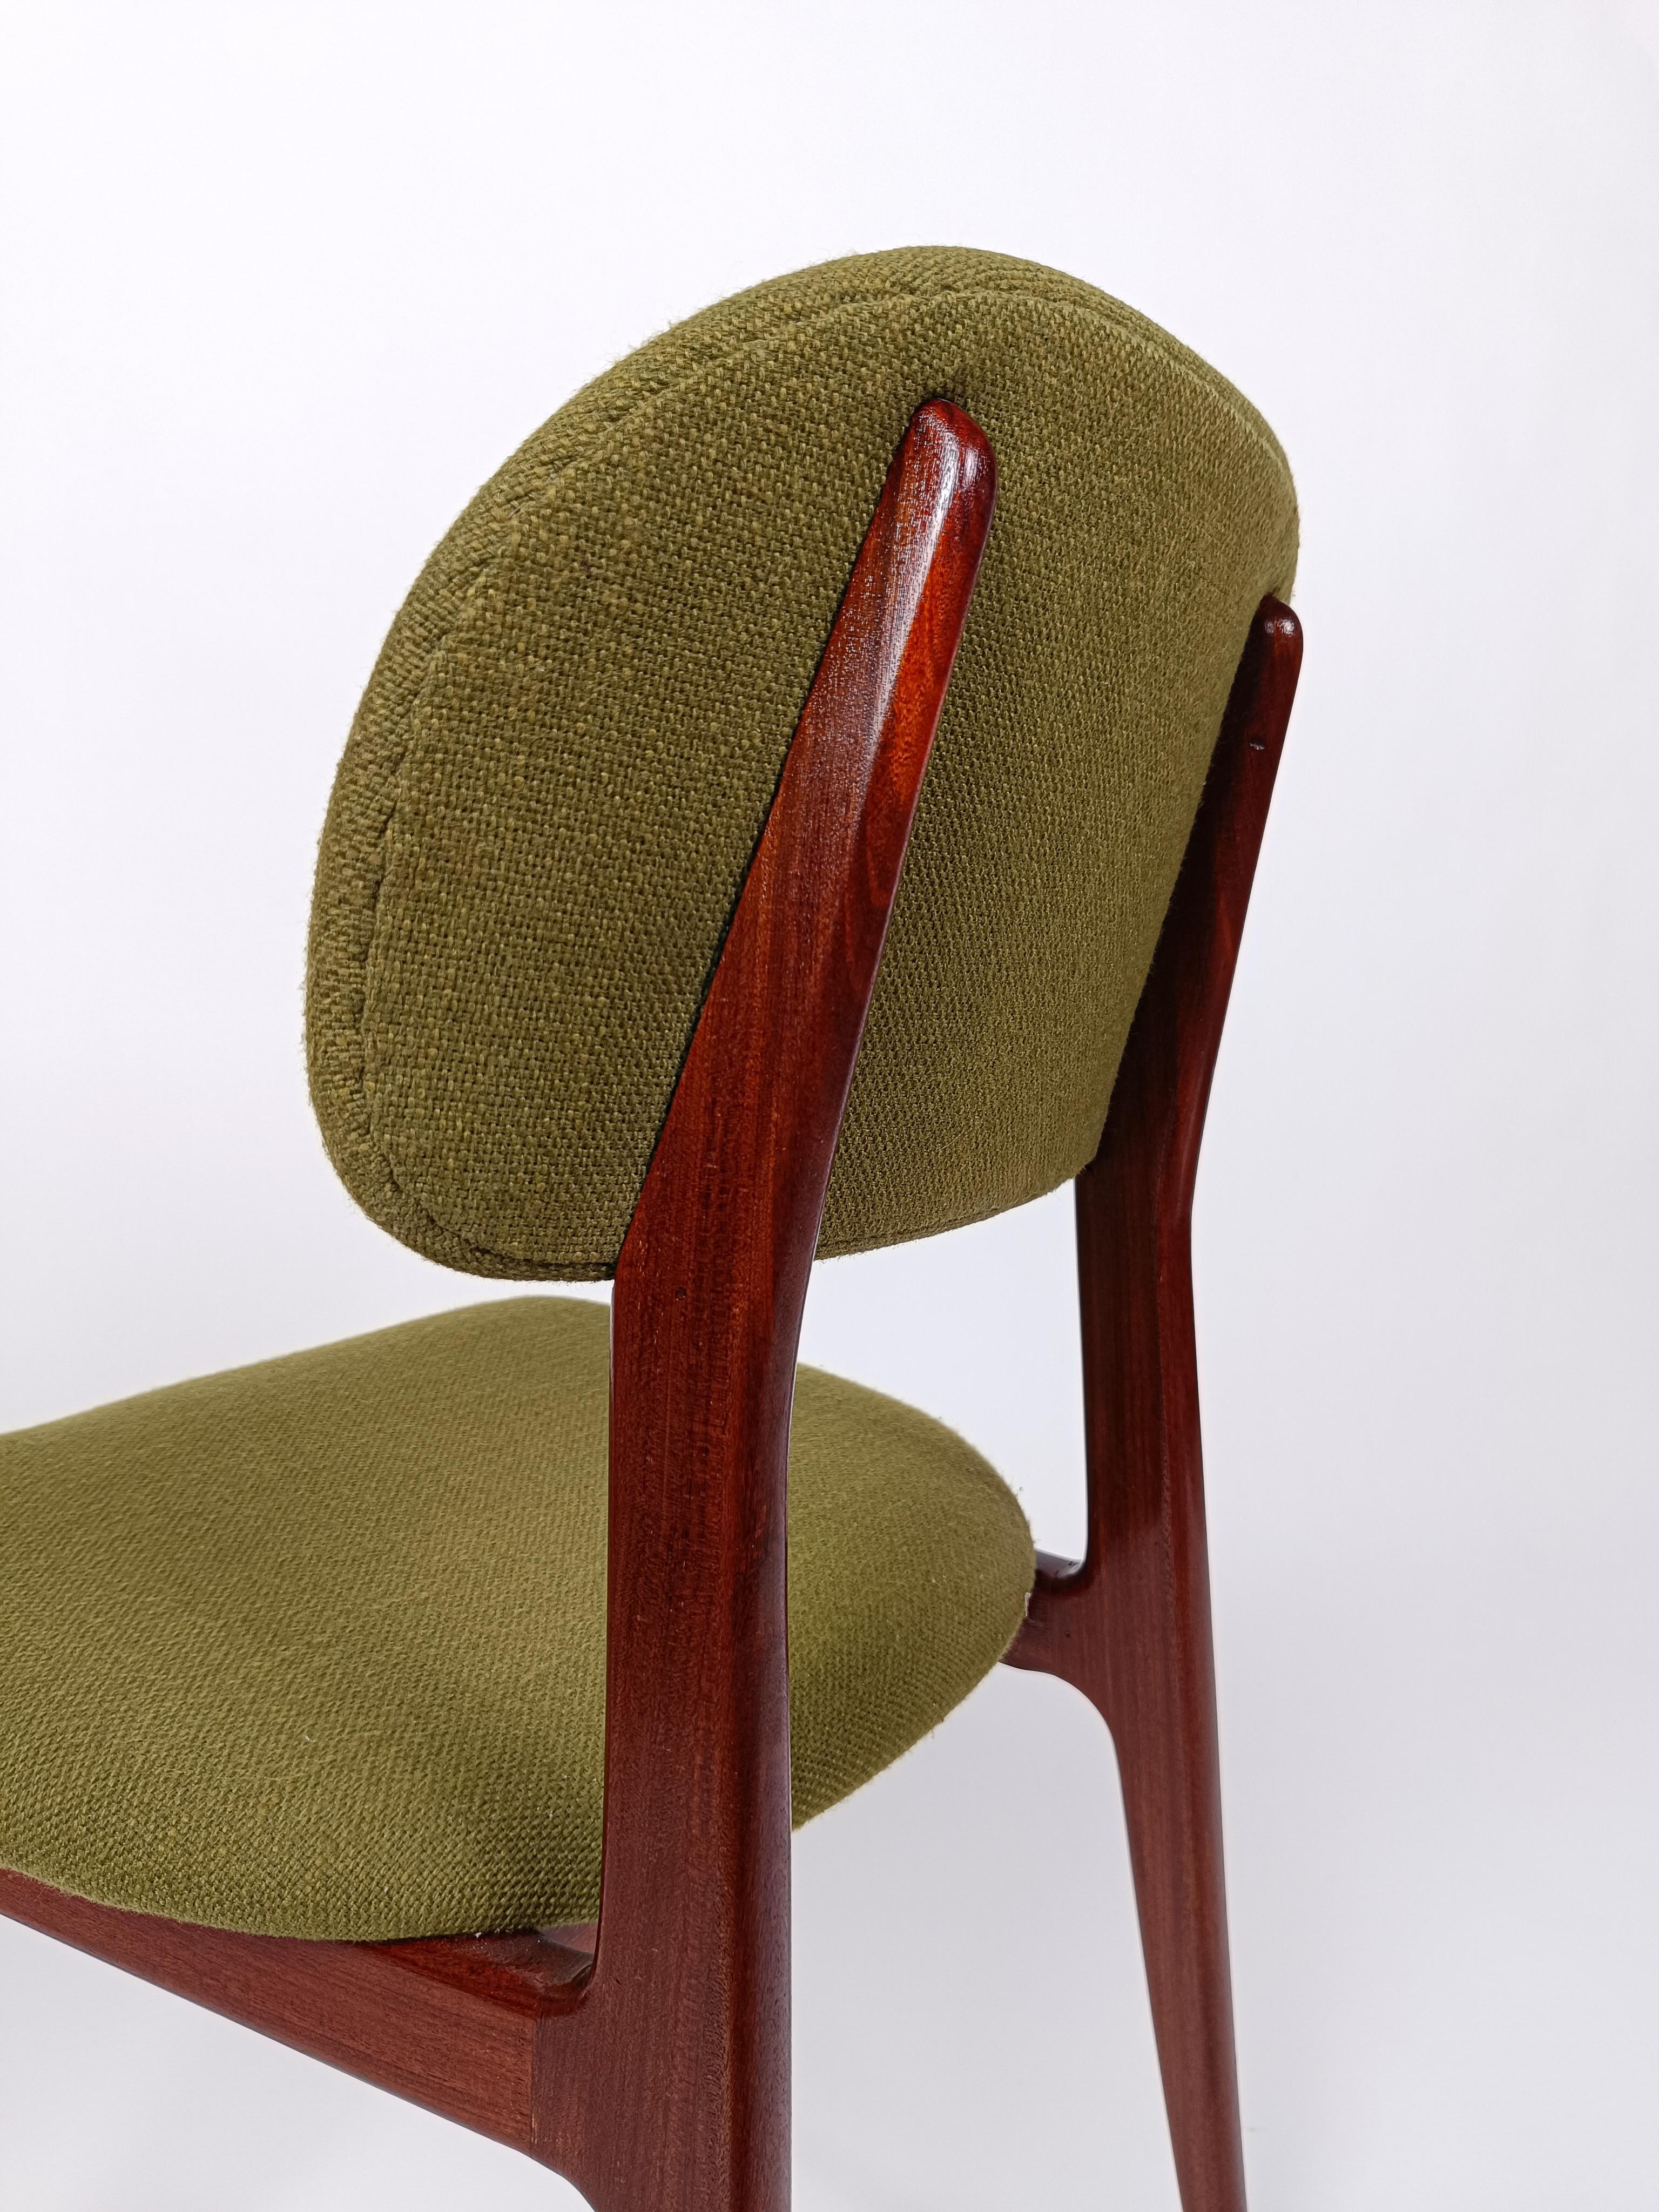 Italian Midcentury Chairs Attributed to Carlo Hauner and Martin Eisler, 1960s For Sale 1